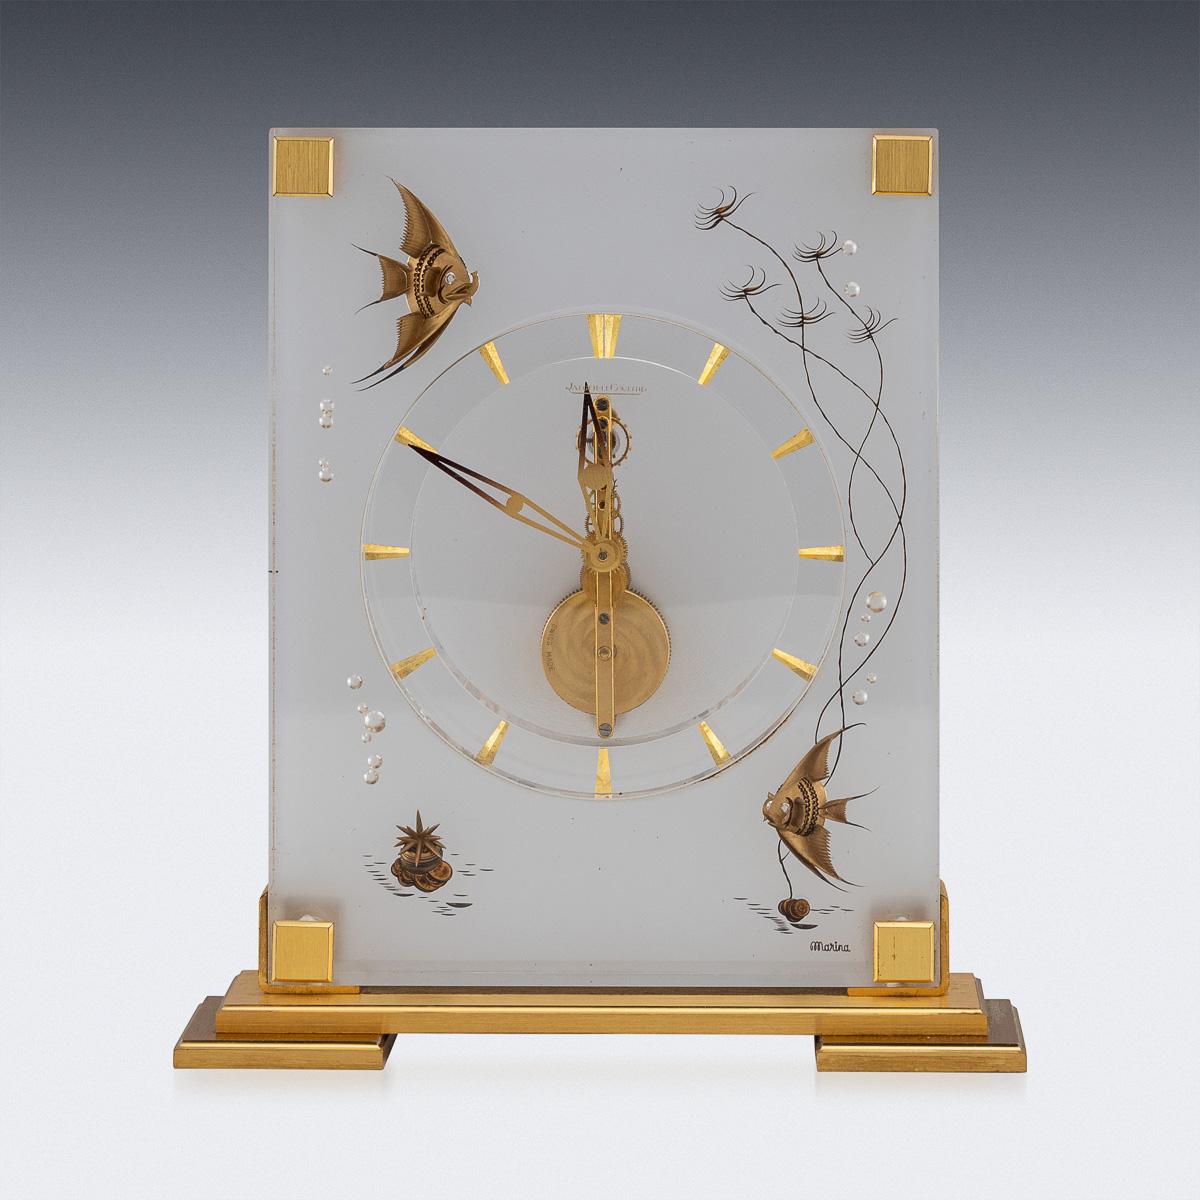 A Mid-Century mantel clock by Jaeger-LeCoultre graces its surroundings with an elegant Lucite case adorned with inset brass decorations depicting fish among reeds and rising air bubbles. It operates on an eight-day movement, featuring